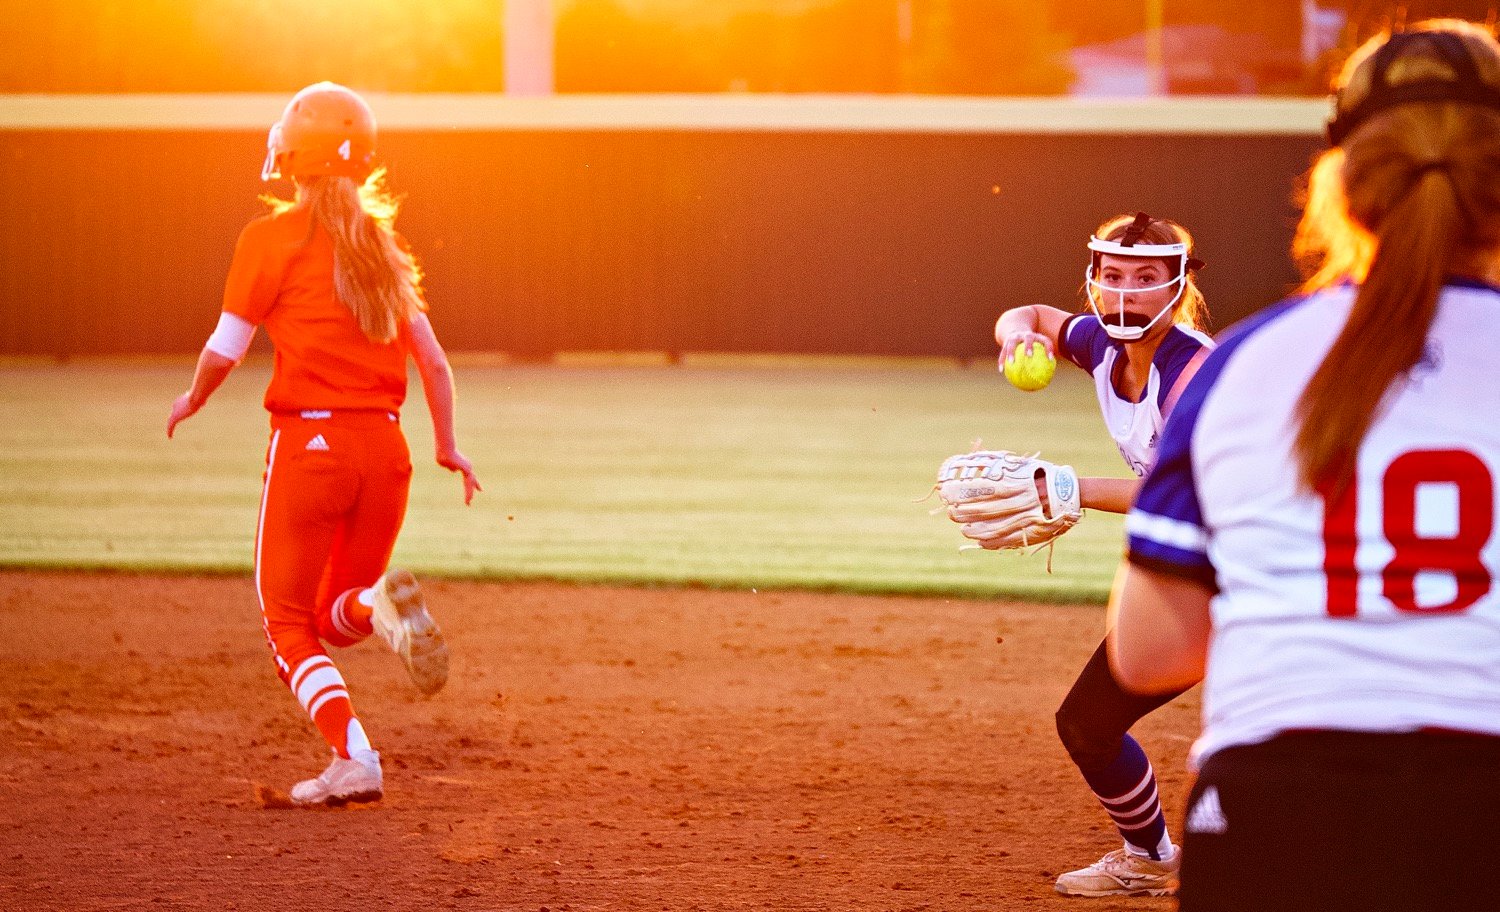 Lindsey Hornaday makes a play to Reiny Luman at first base as Emily Wiley makes her way to second, into the setting sun. [see more fields of view]